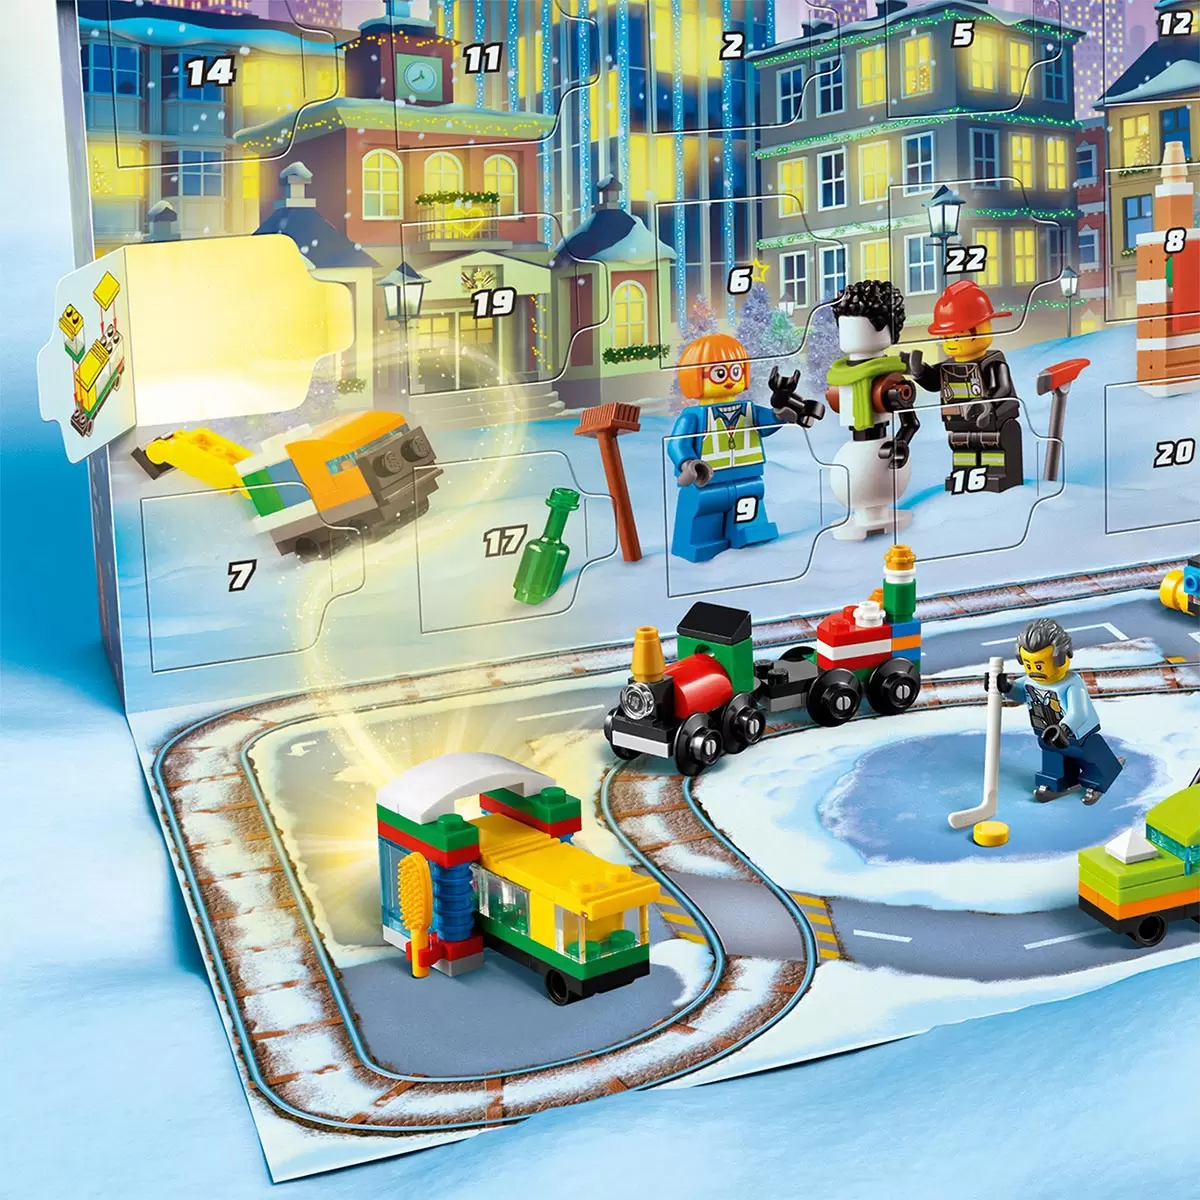 Buy LEGO City Advent Calendar Features3 Image at Costco.co.uk